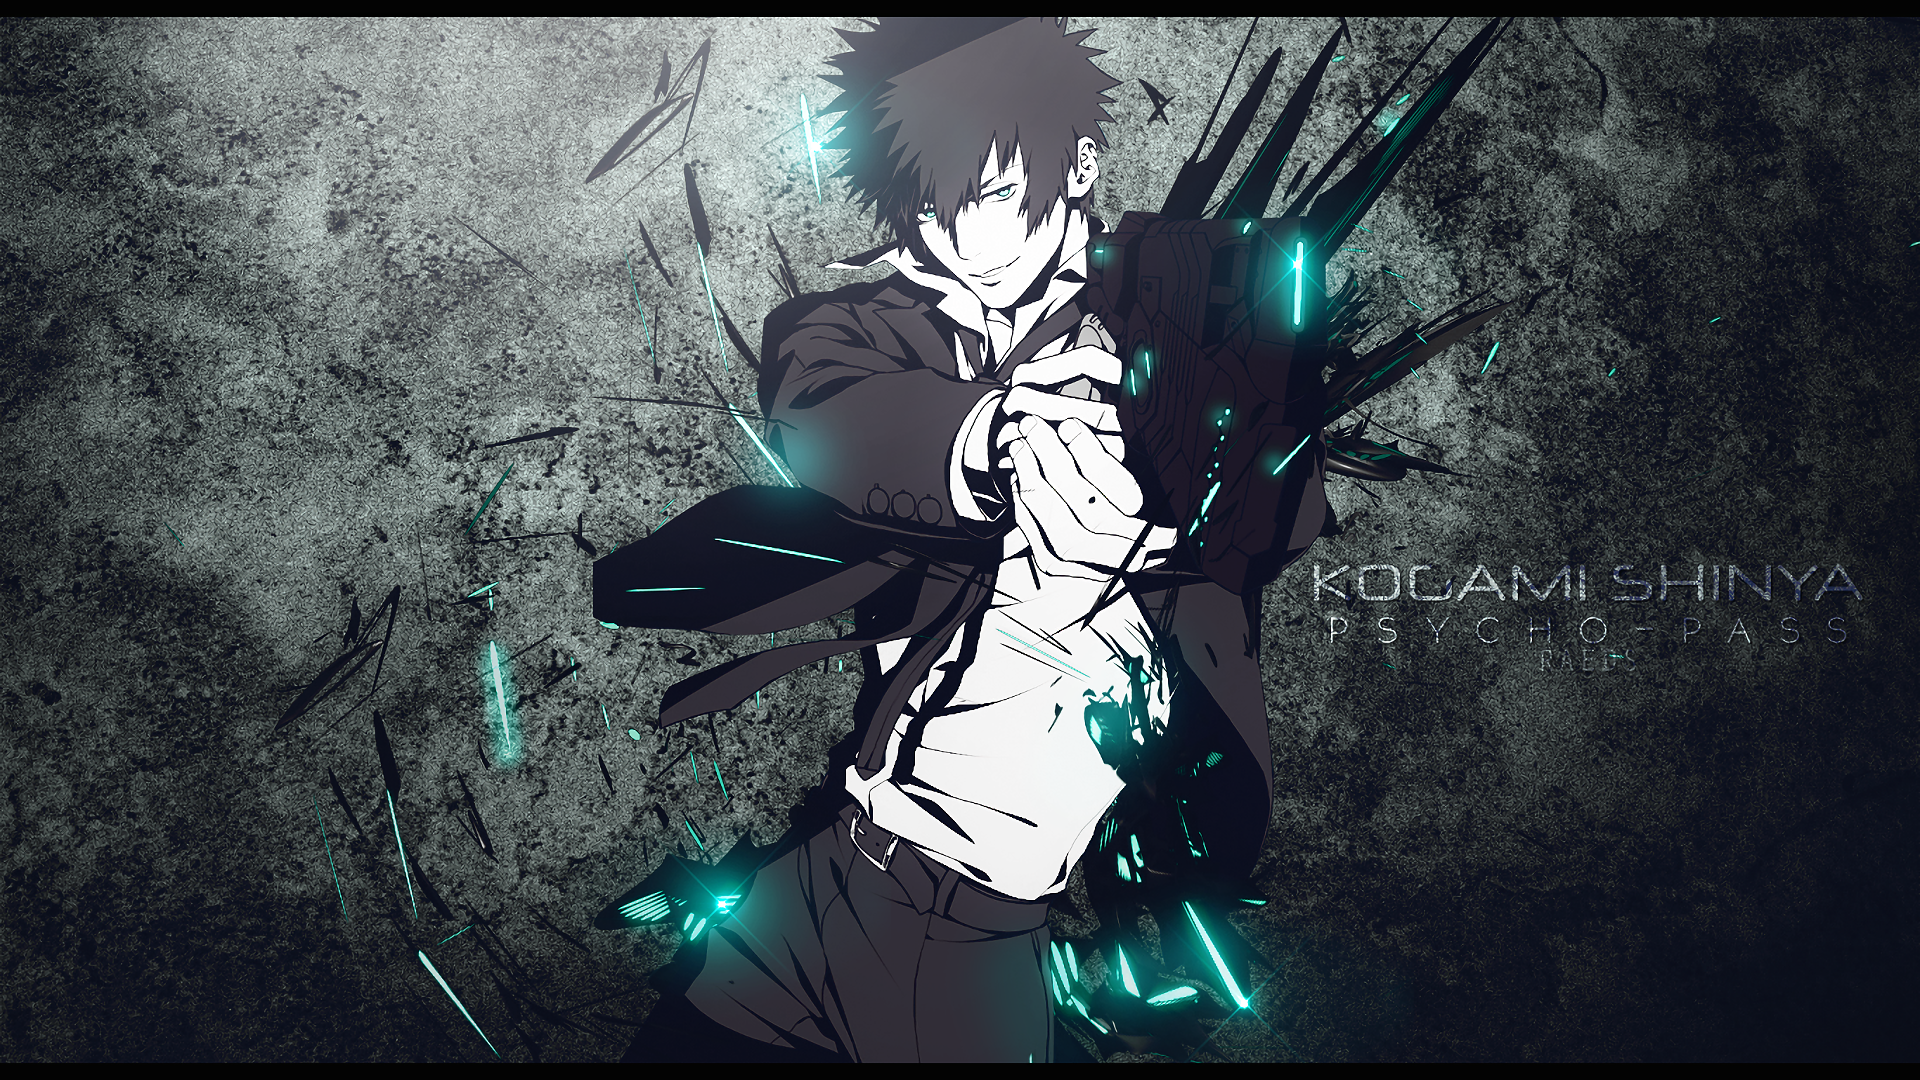 Psycho Pass Wallpapers Pictures Images HD Wallpapers Download Free Images Wallpaper [wallpaper981.blogspot.com]